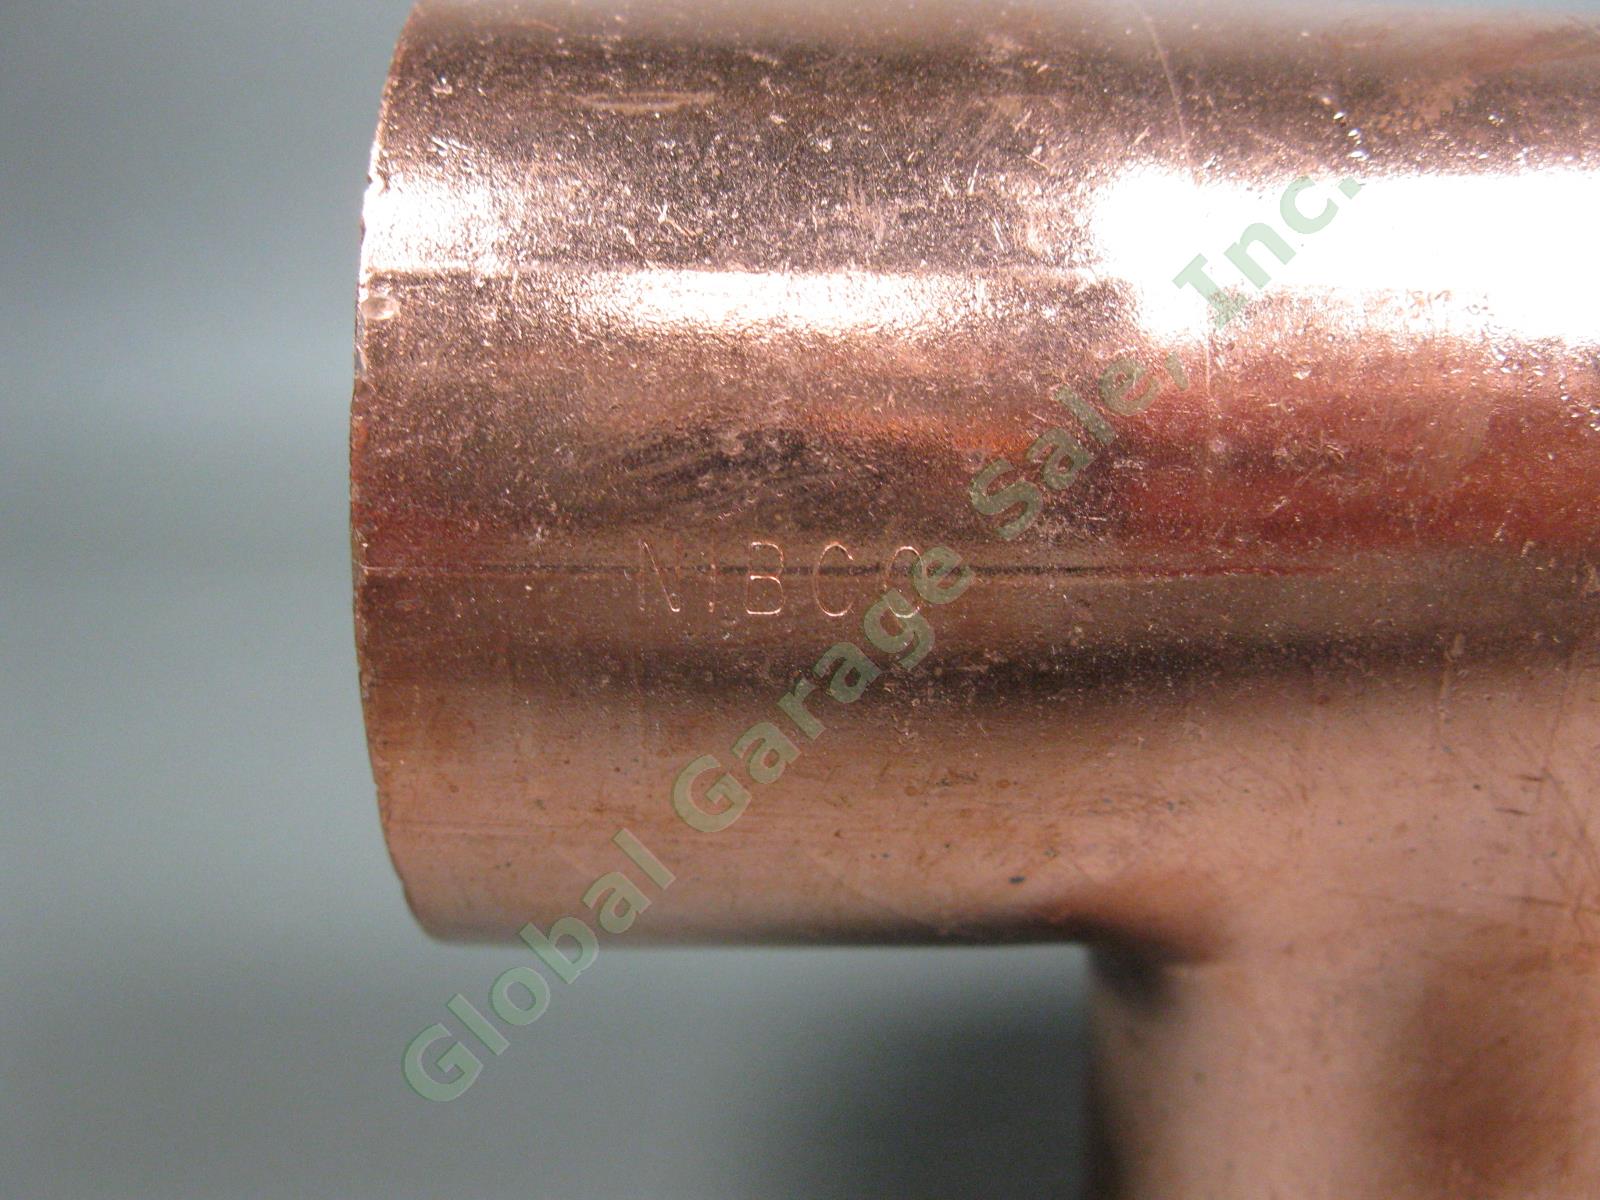 2 NEW Nibco 2" x 2" x 1-1/2" Copper EPC Reducing Sweat Tees Pipe Fittings Pair 1